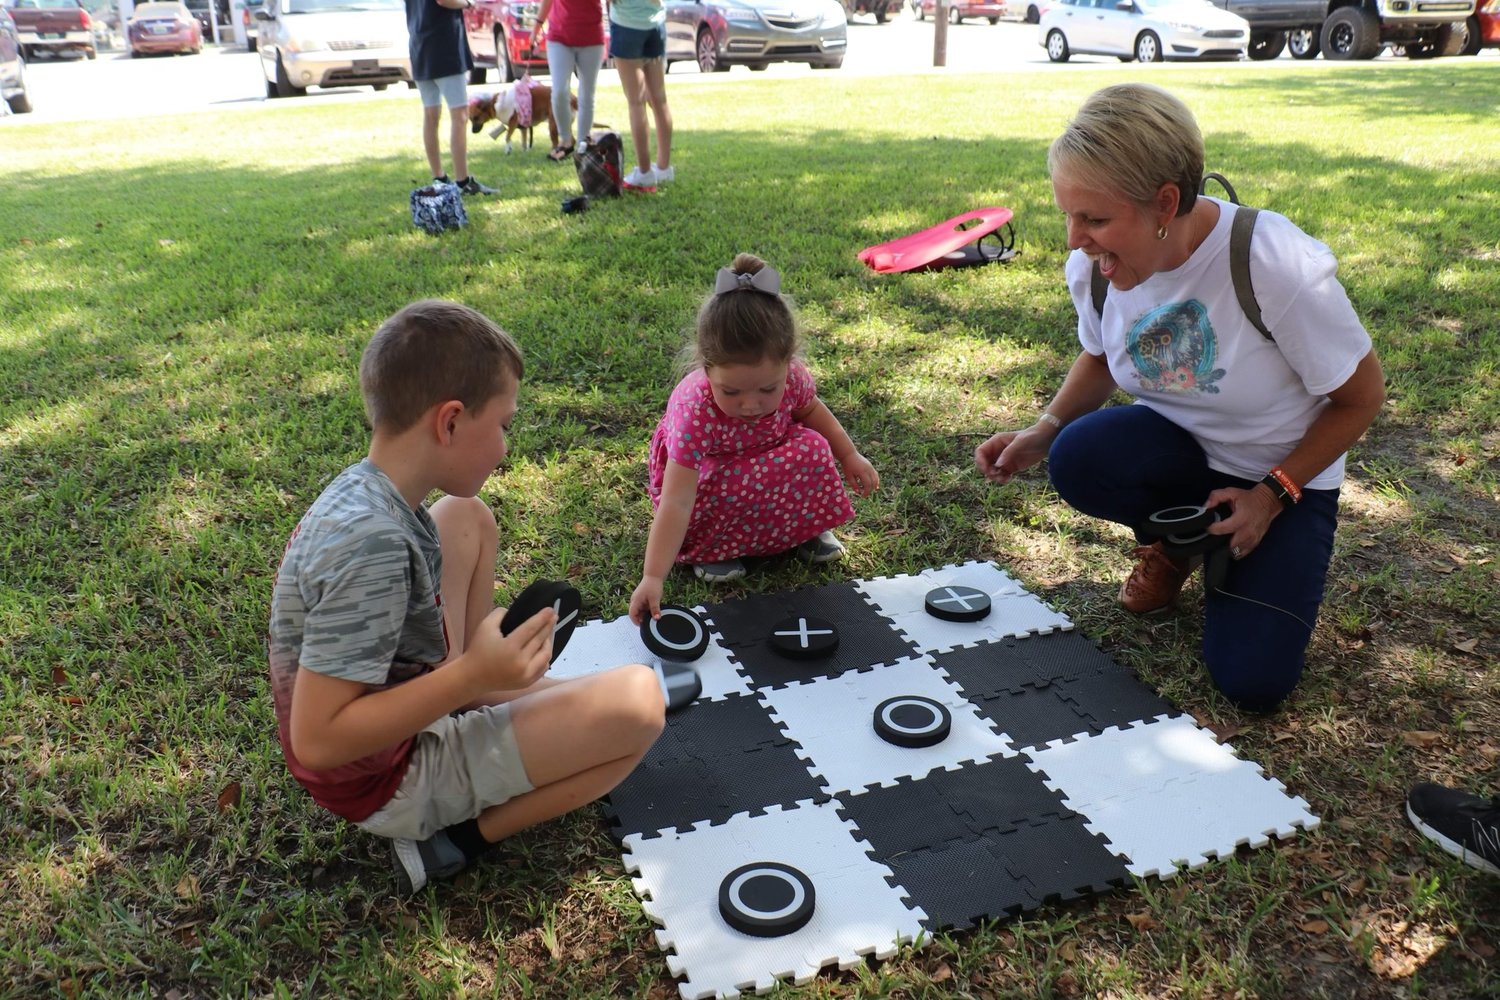 Families filled Blackburn Park Saturday for the Dogs on Hand event and enjoyed games, food and lots of dogs.